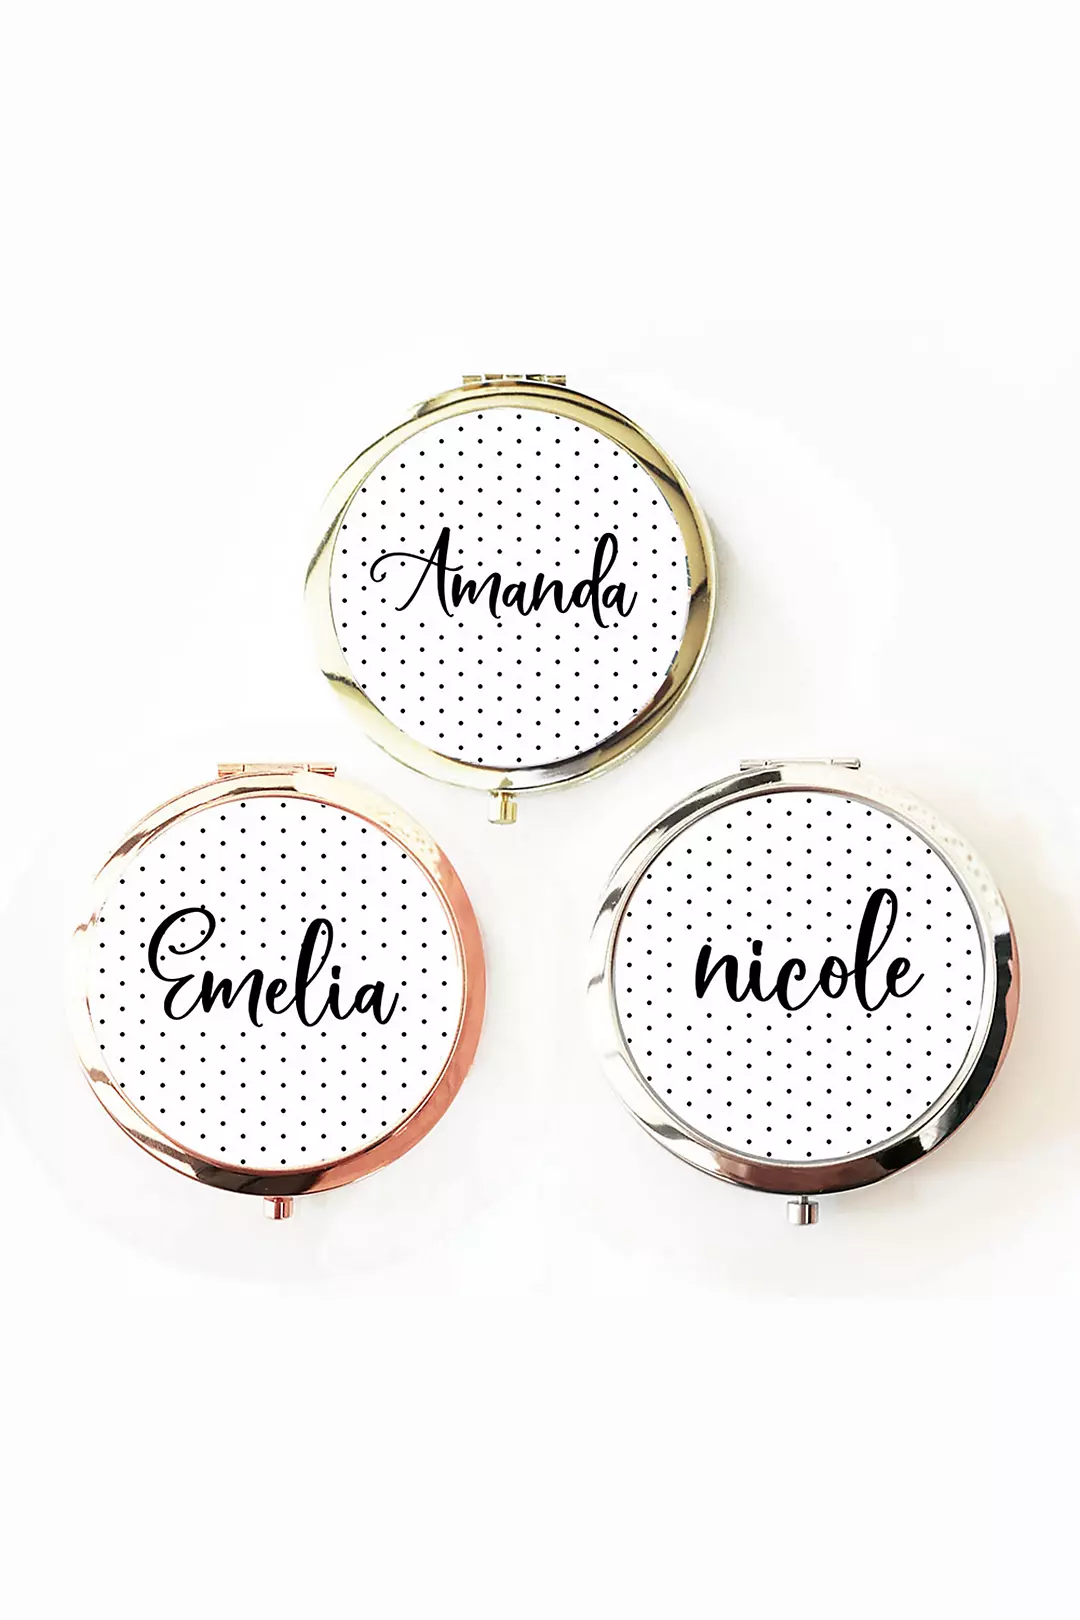 Personalized Polka Dot Compact Mirror Image